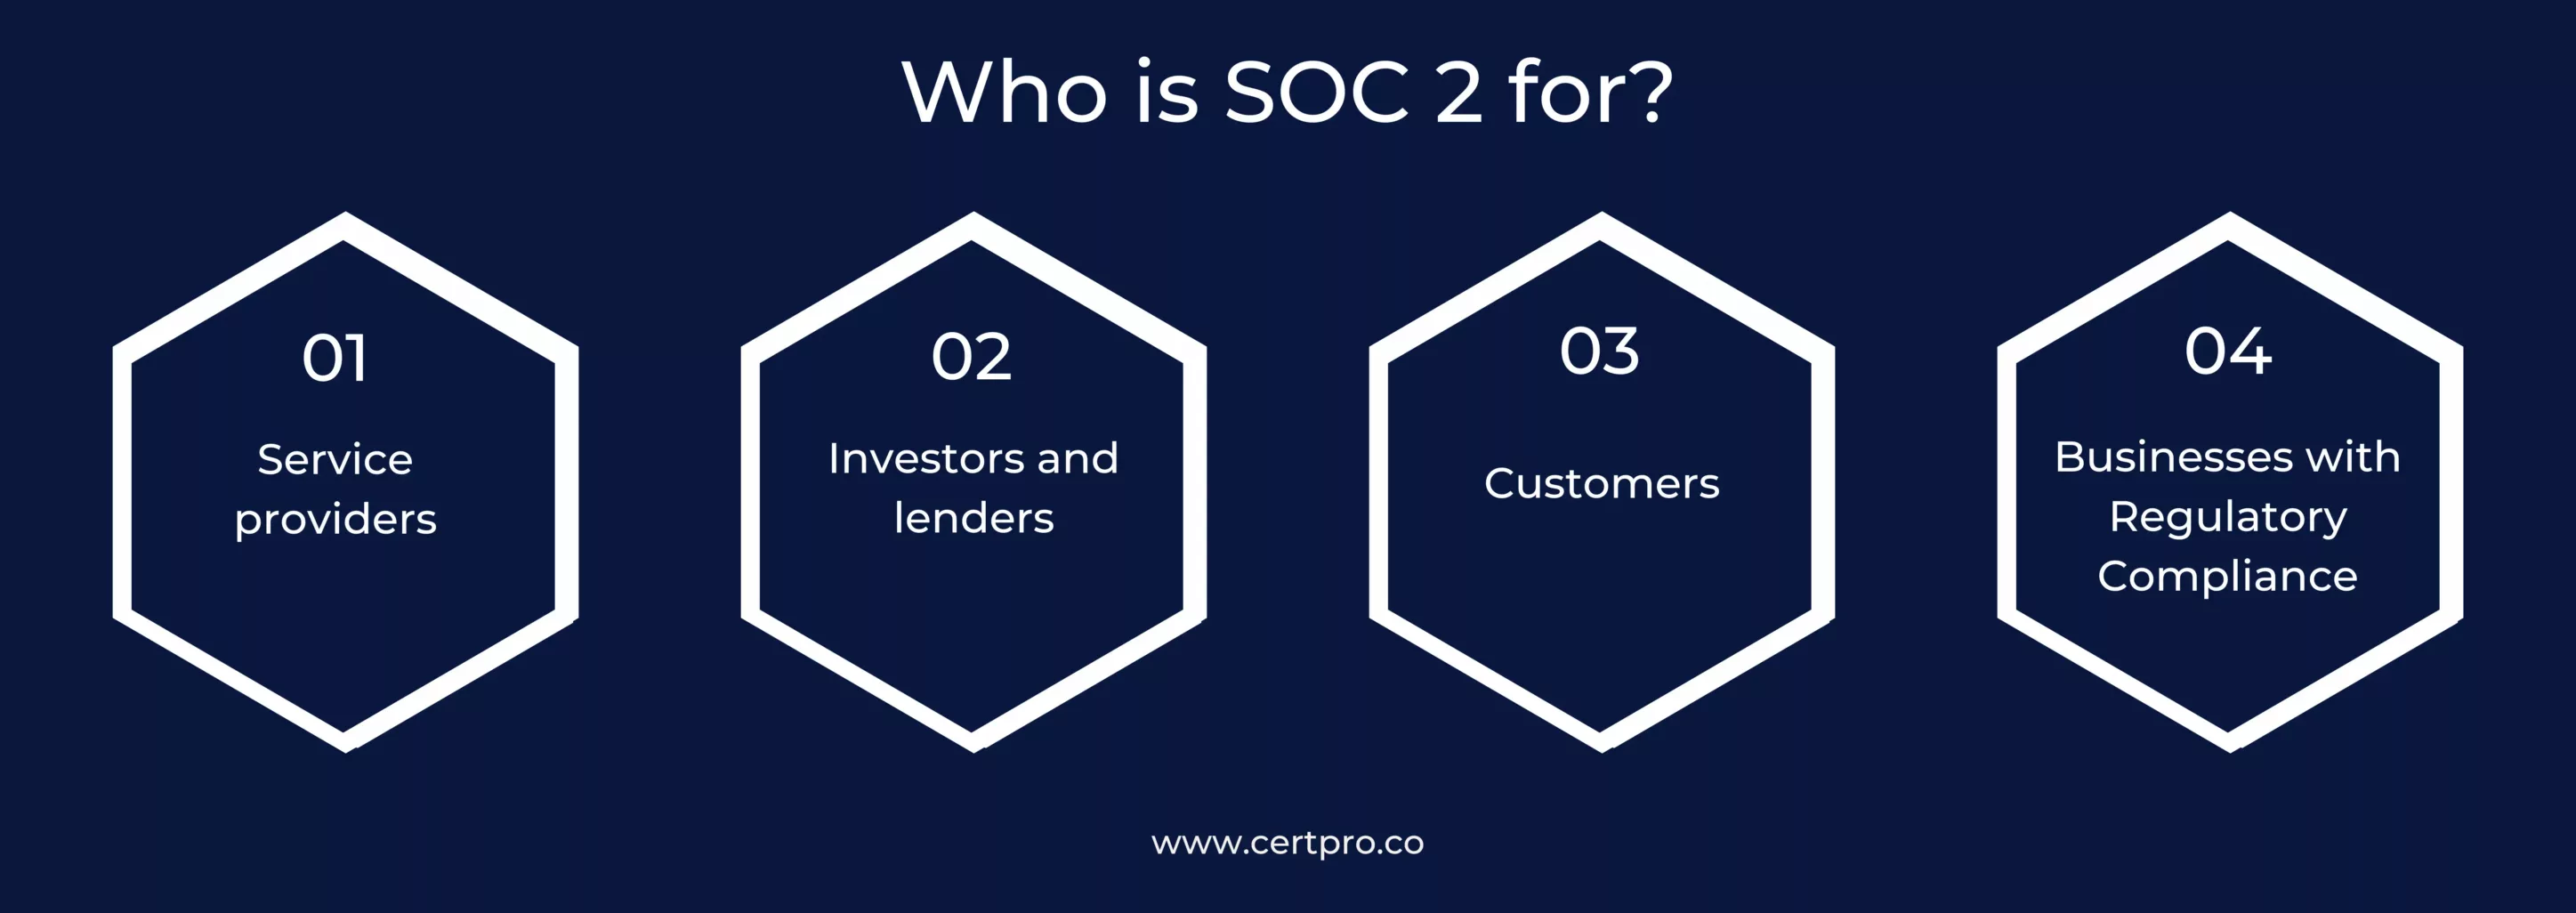 WHO IS SOC 2 FOR